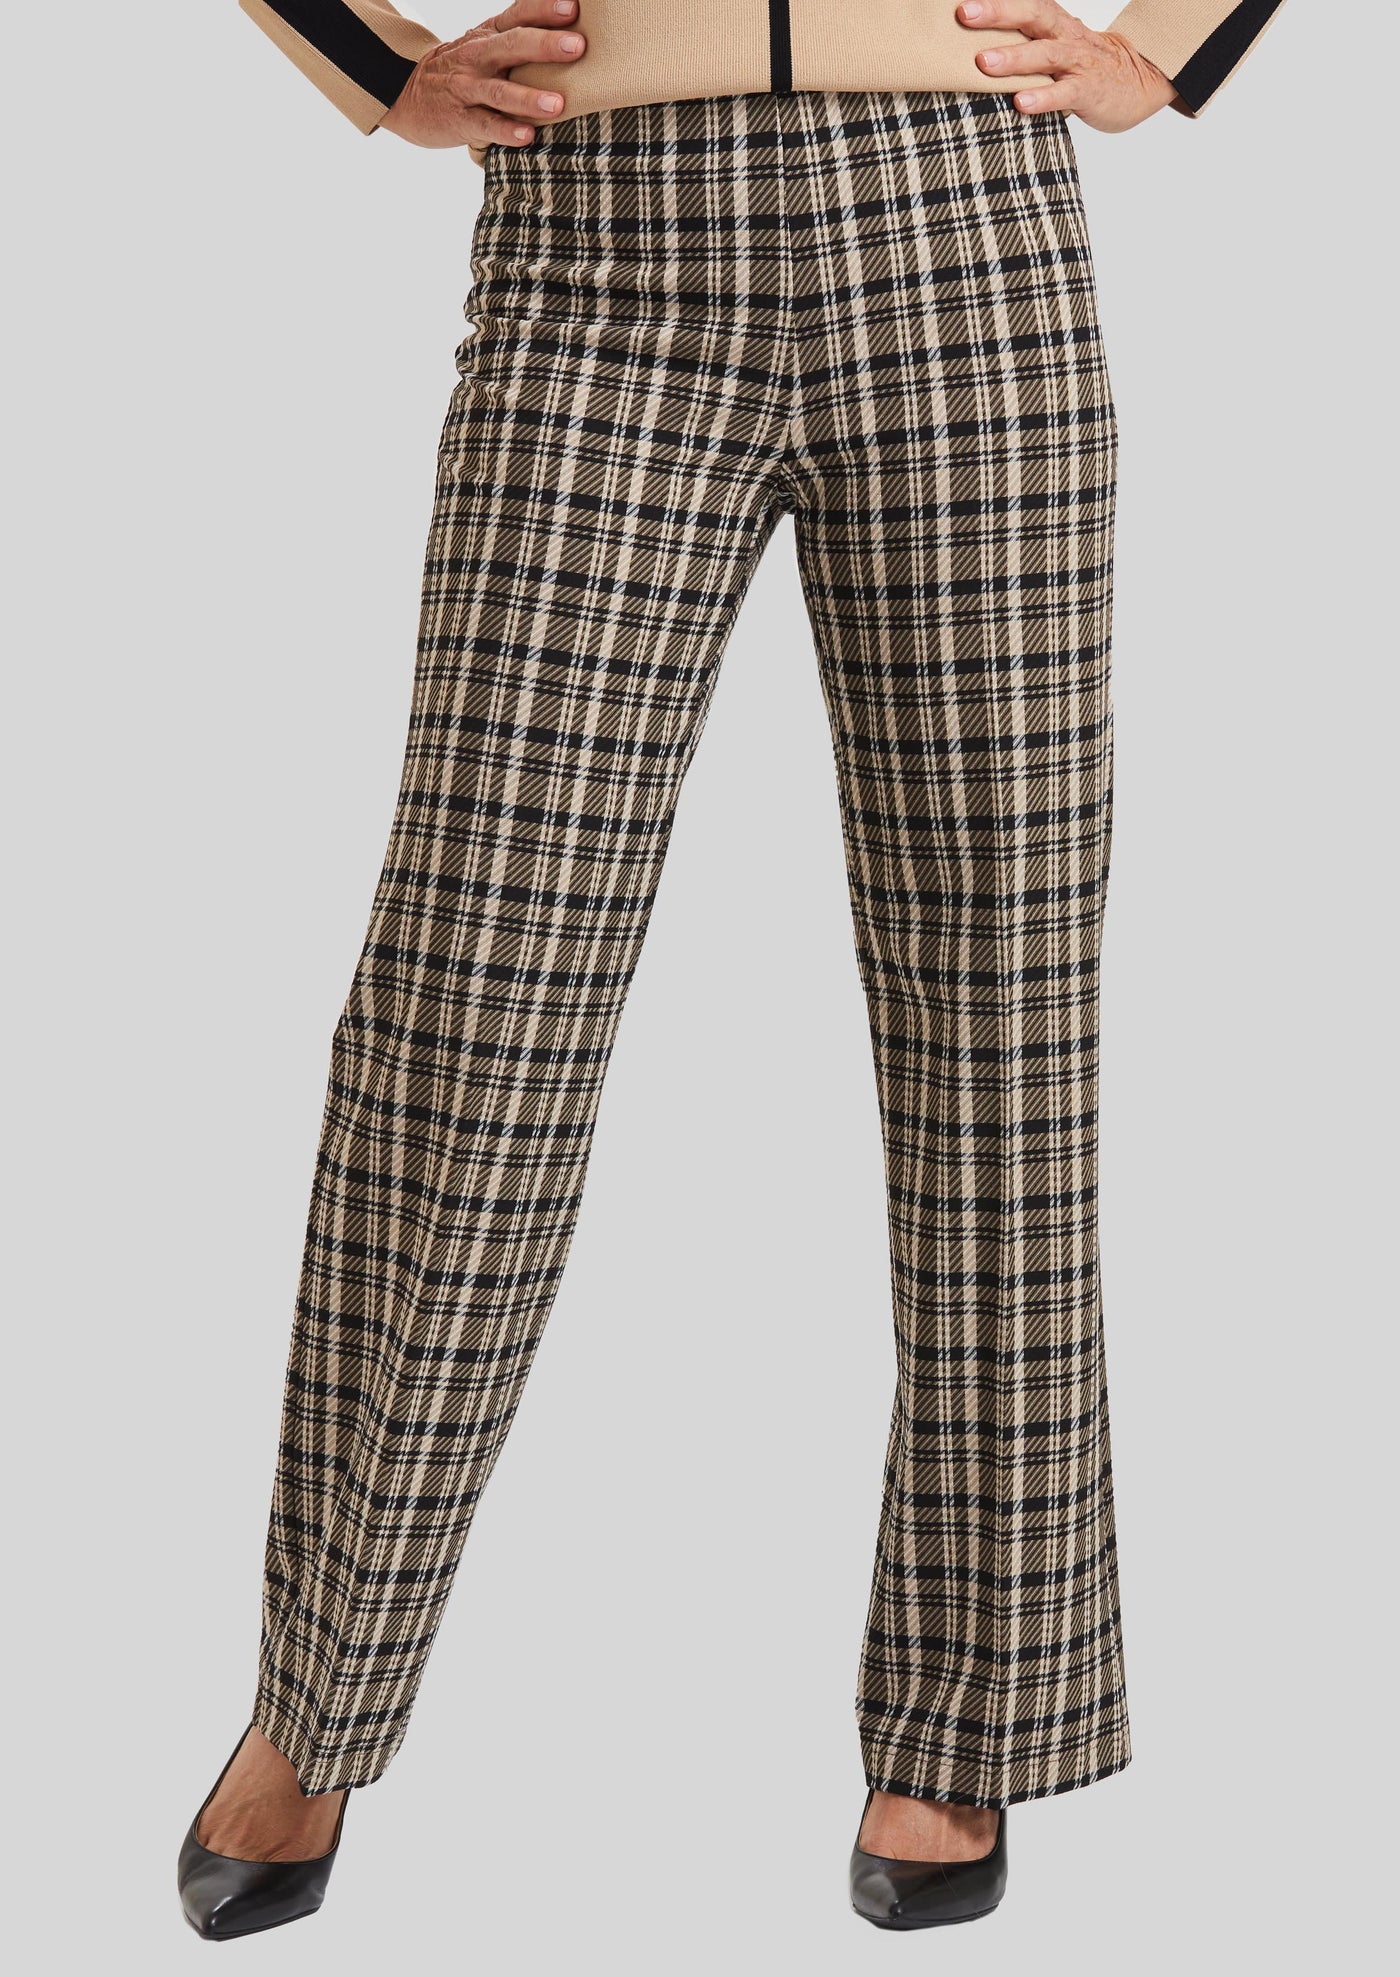 Munich Plaid Jules Clean Pull On Pant- FINAL SALE – Peace of Cloth